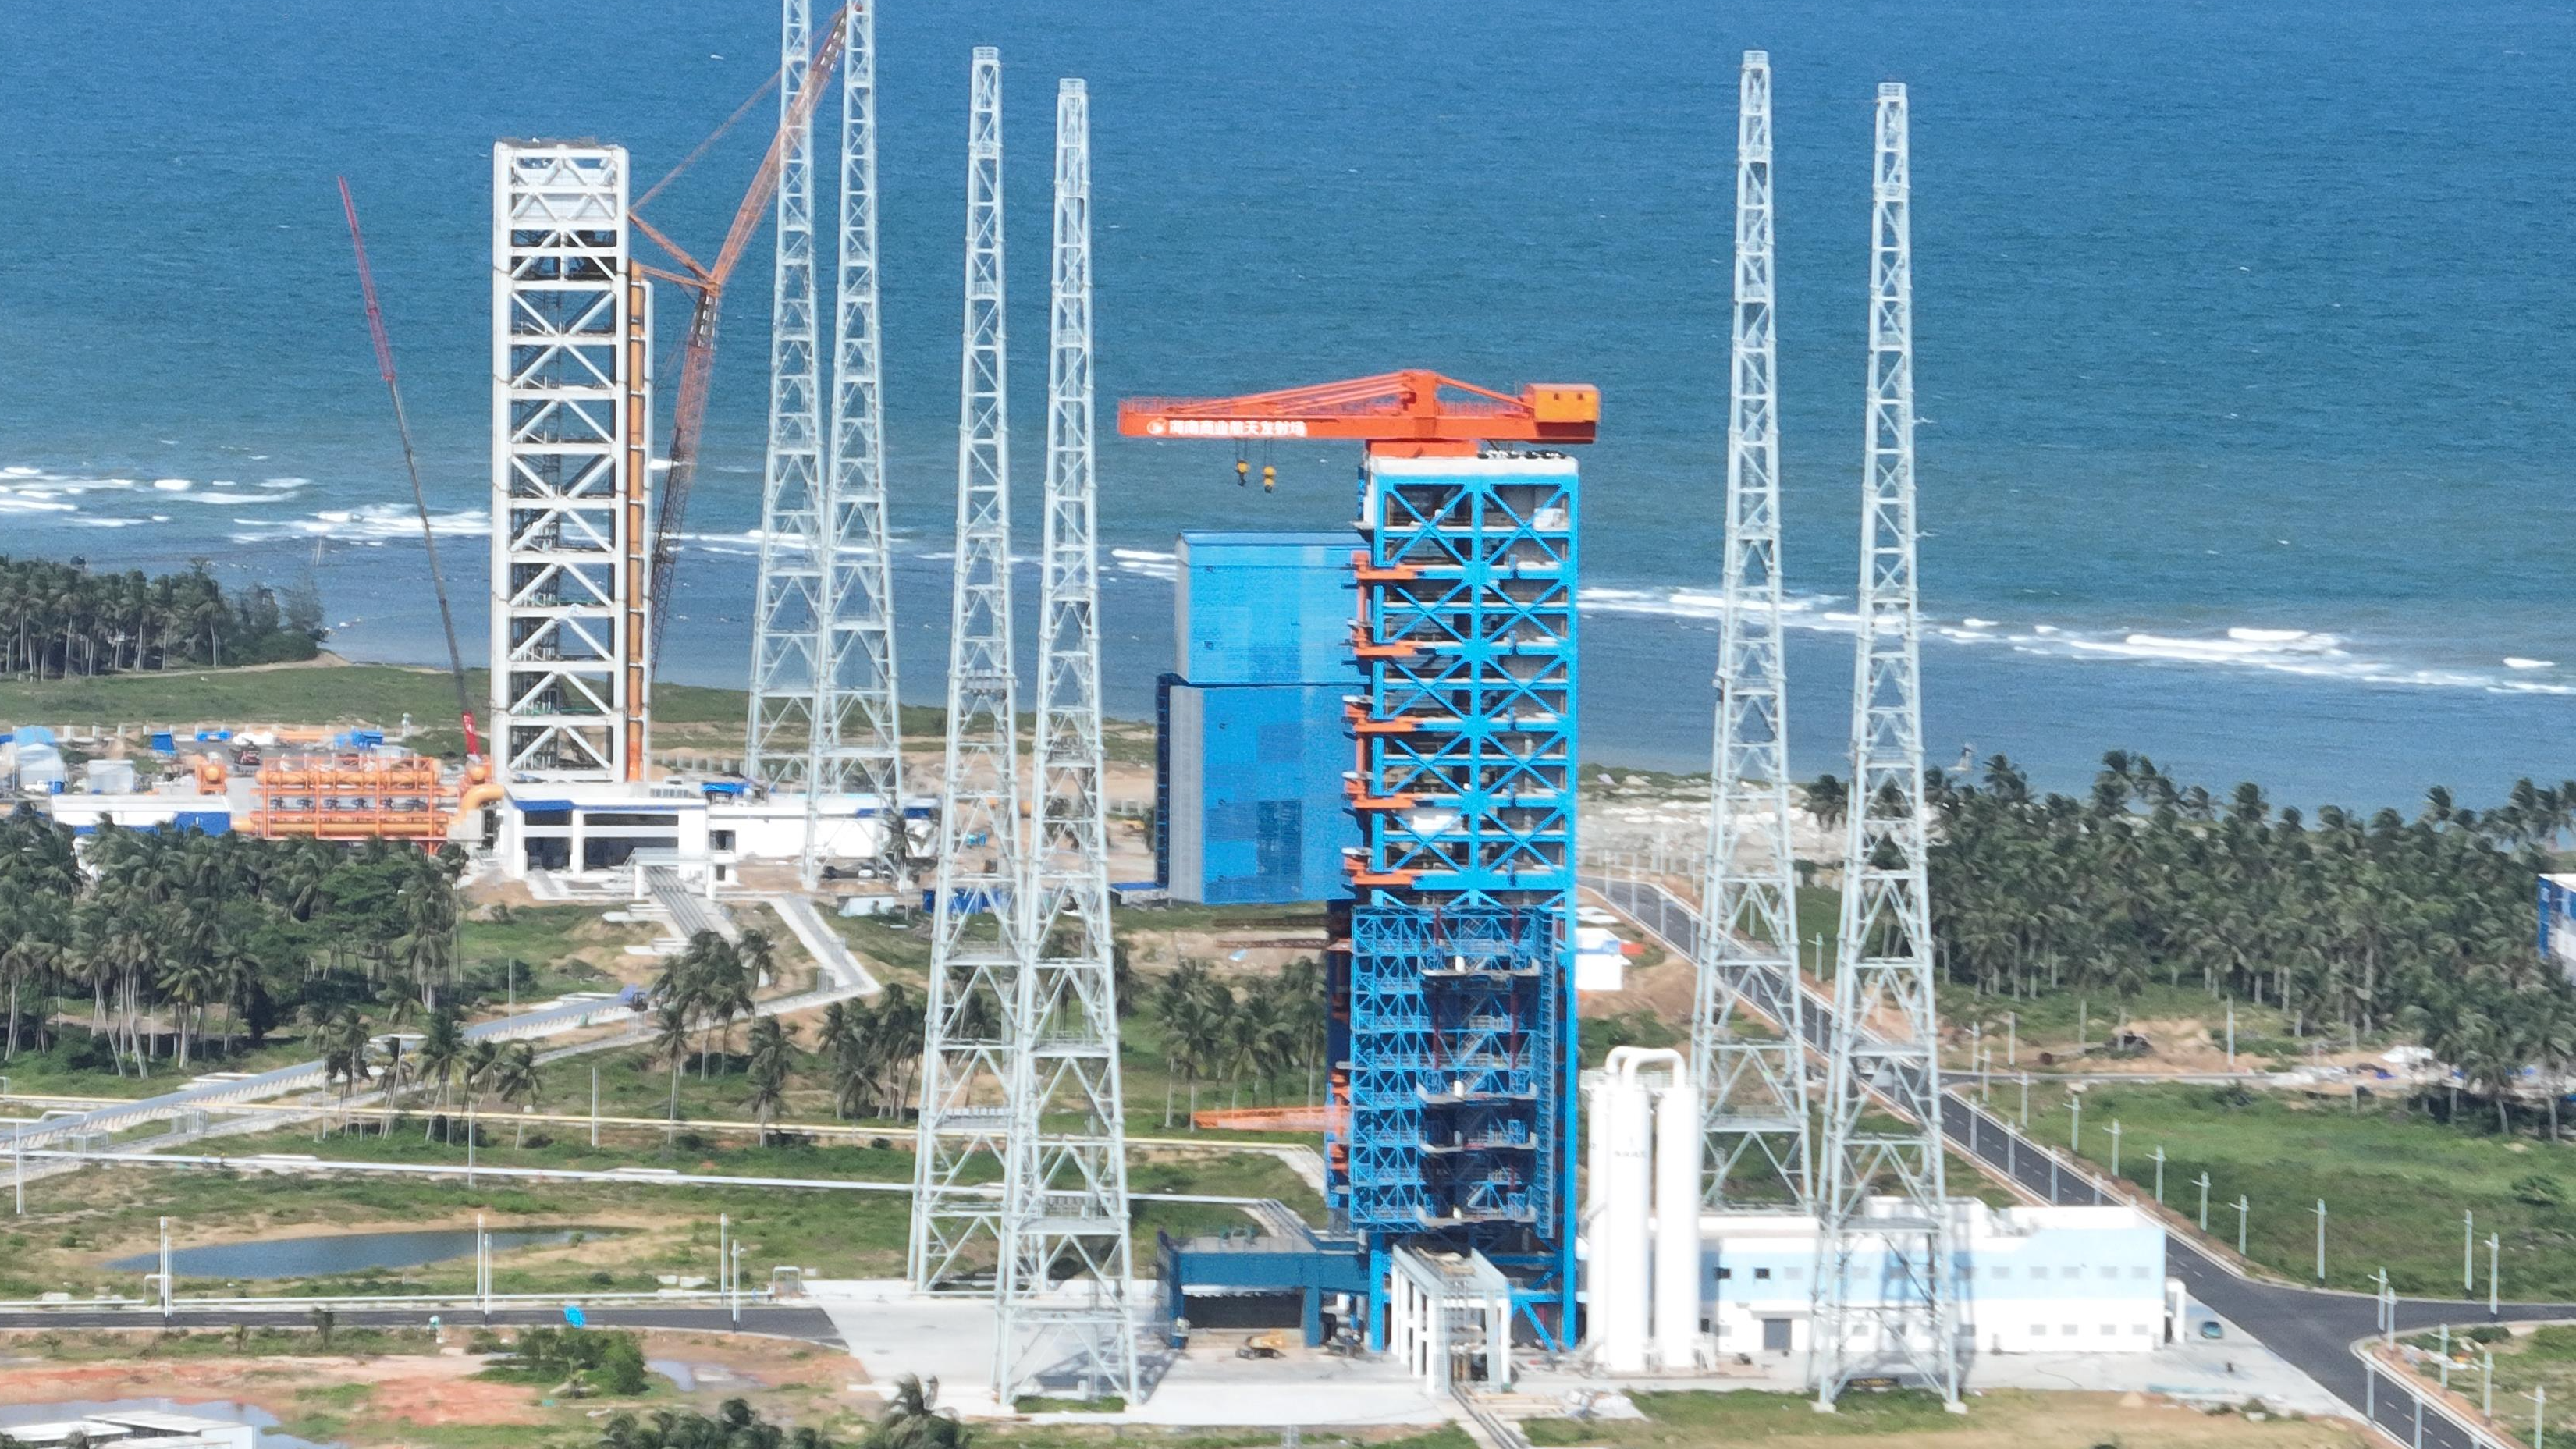 China's first commercial space launch site, the Hainan commercial space launch site, is located in Wenchang City, south China's Hainan Province. /CMG